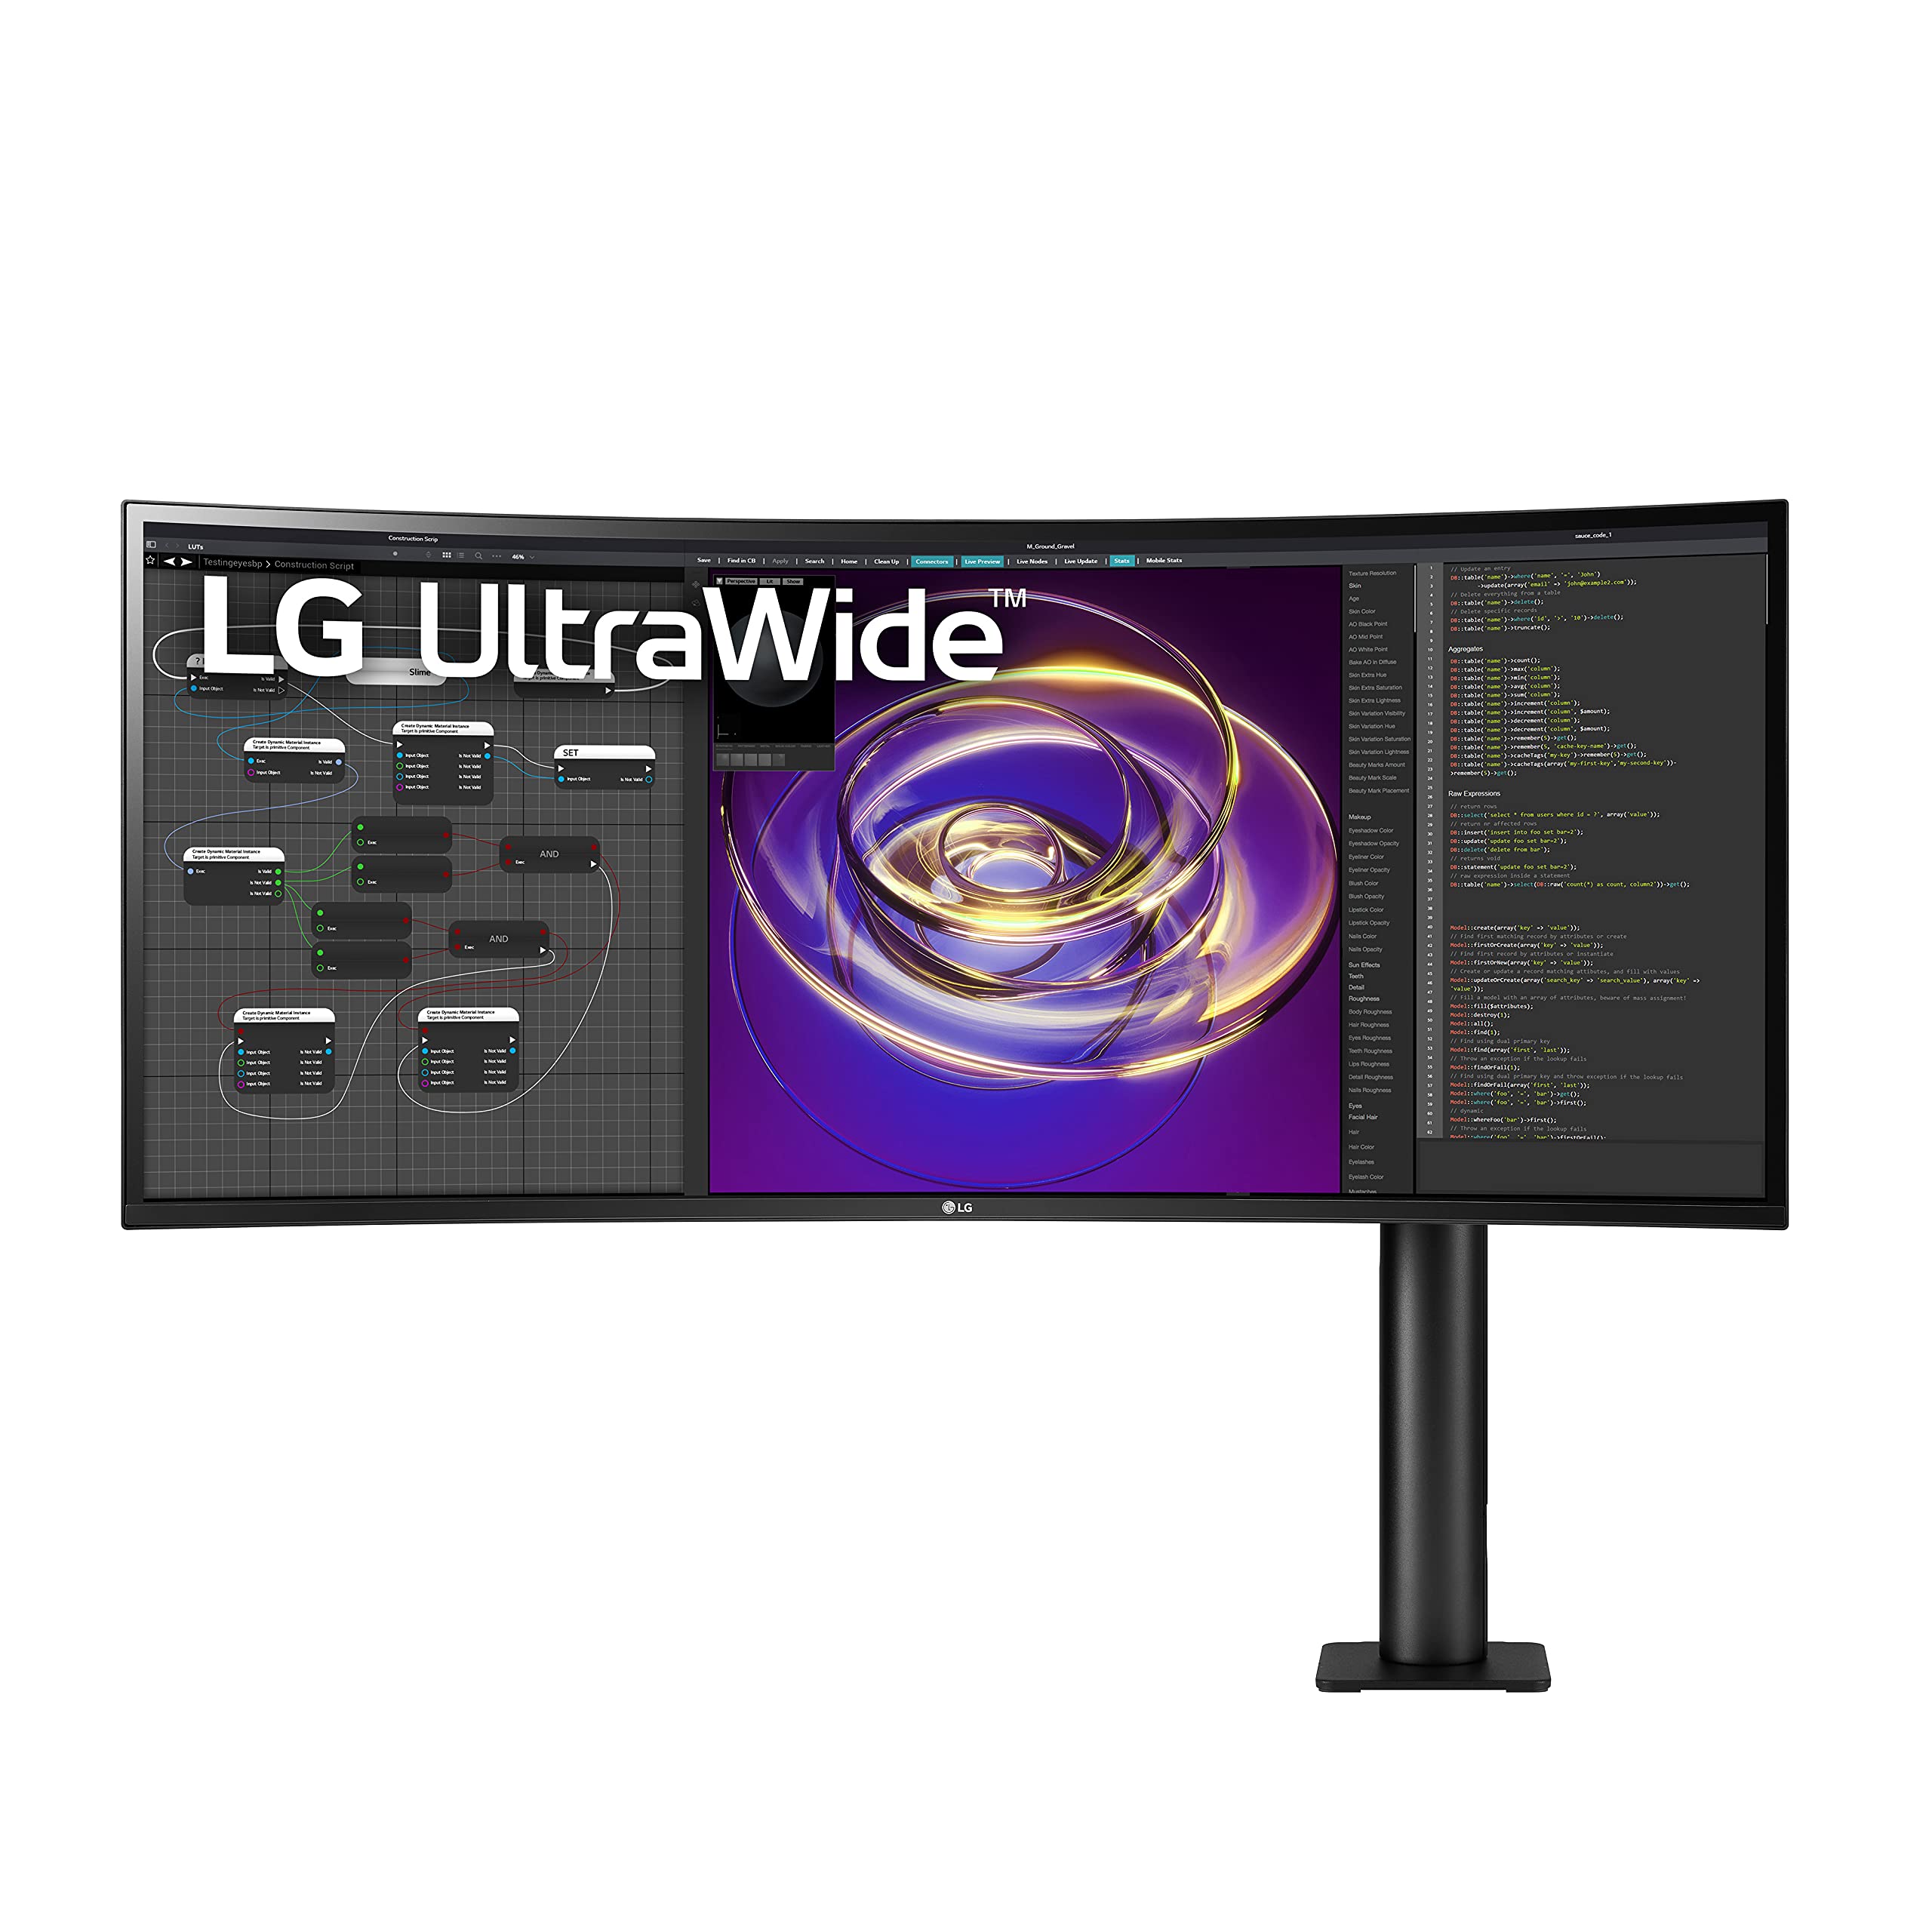 LG 34WP88C-B 34-inch Curved 21:9 UltraWide QHD (3440x1440) IPS Display with Ergo Stand (Extend+Retract+Swivel+Height+Tilt), ...